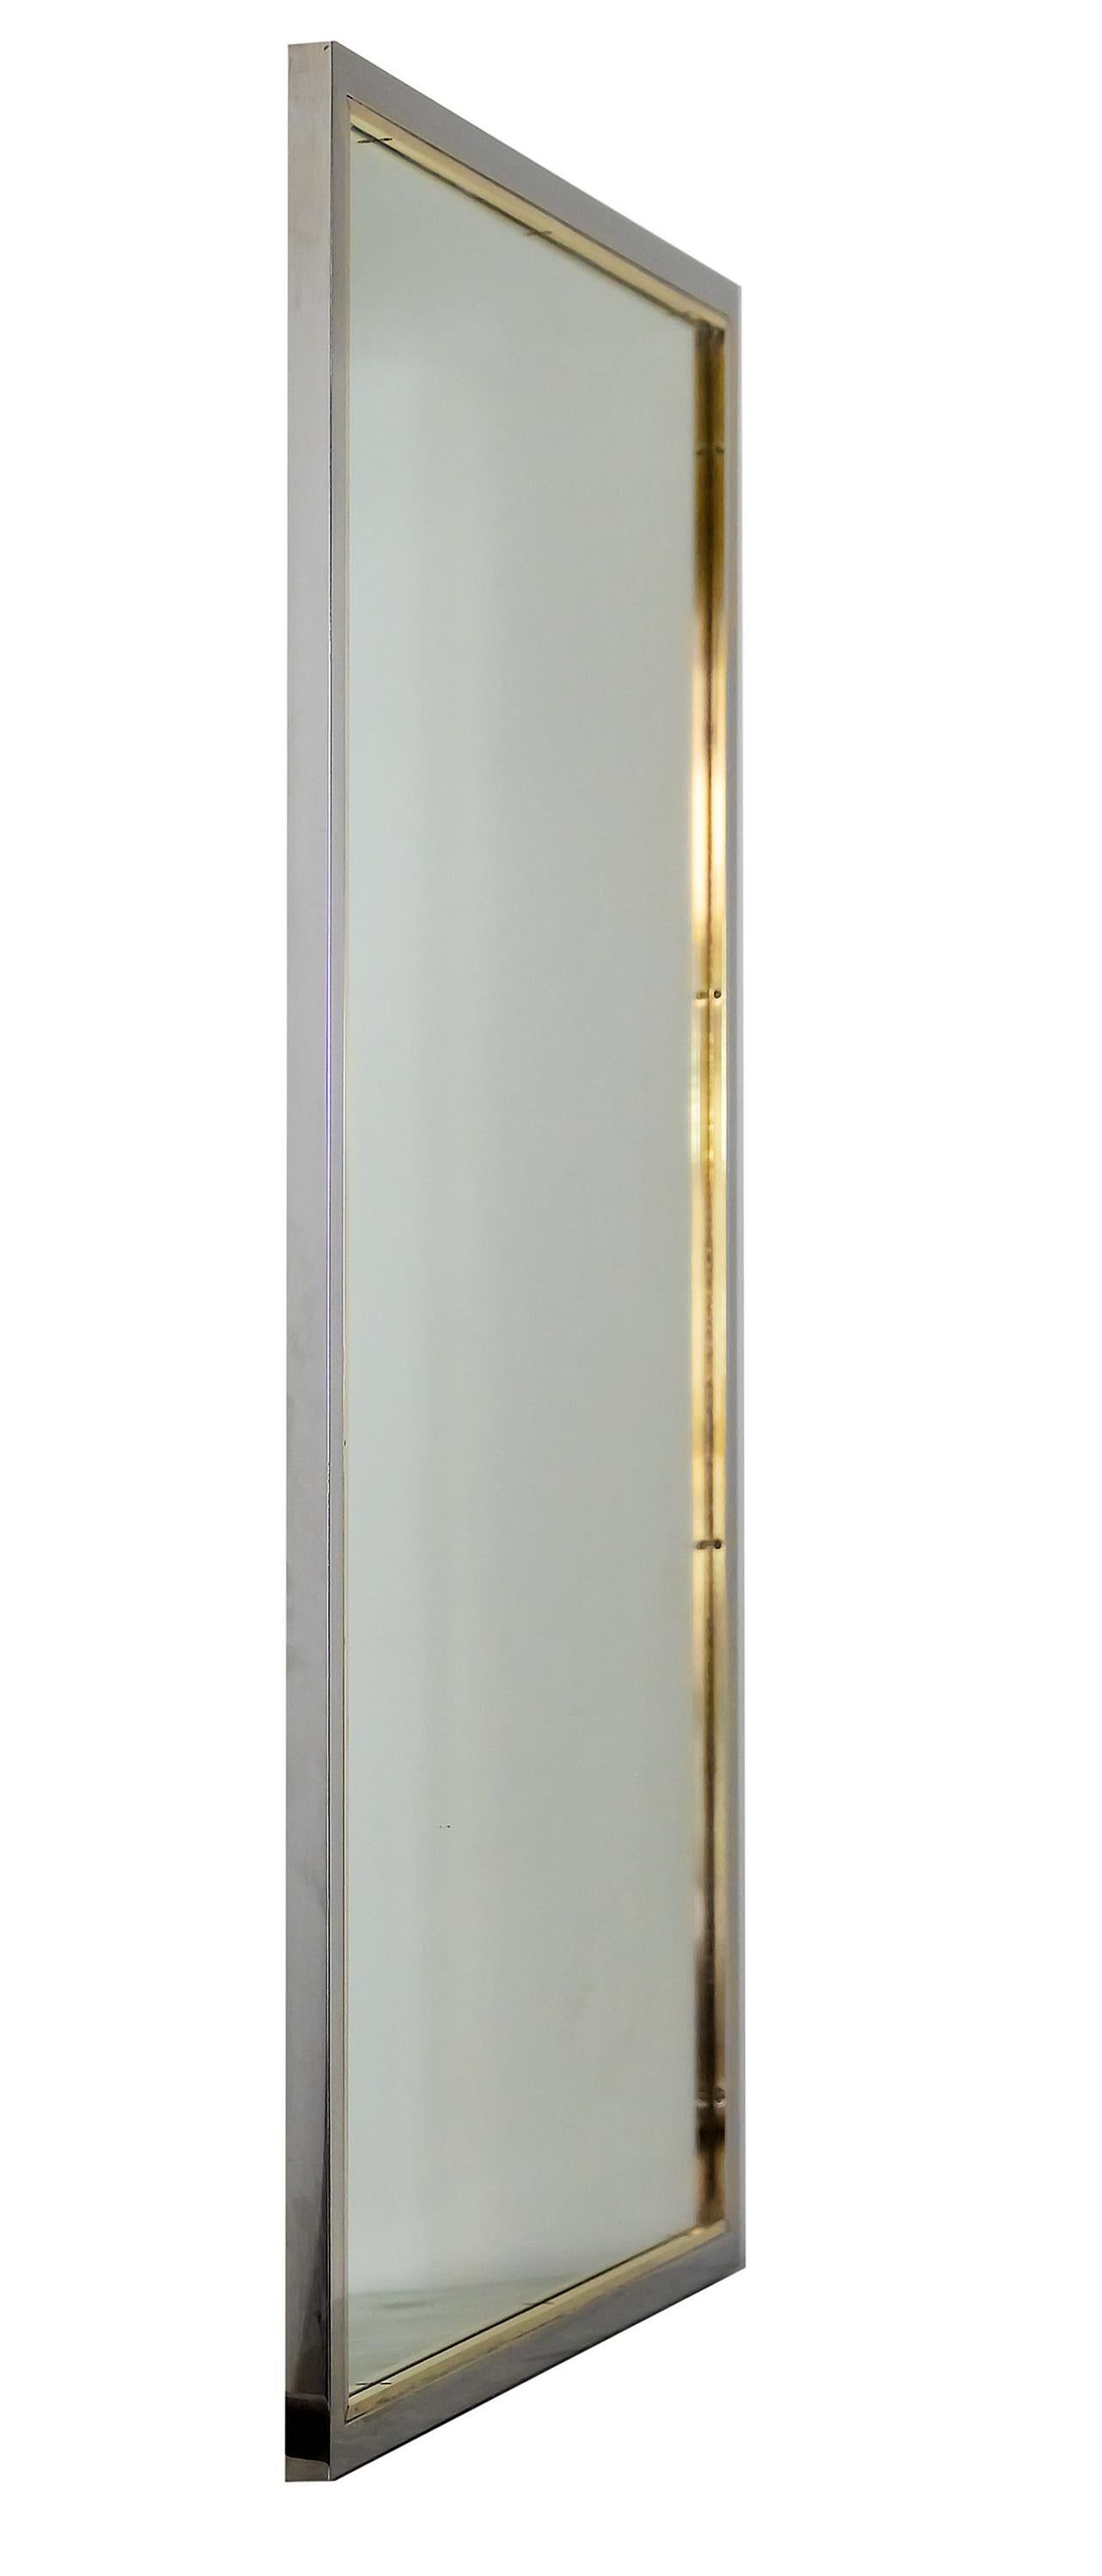 20th Century Midcentury Italian Brass and Chrome Wall Mirror For Sale